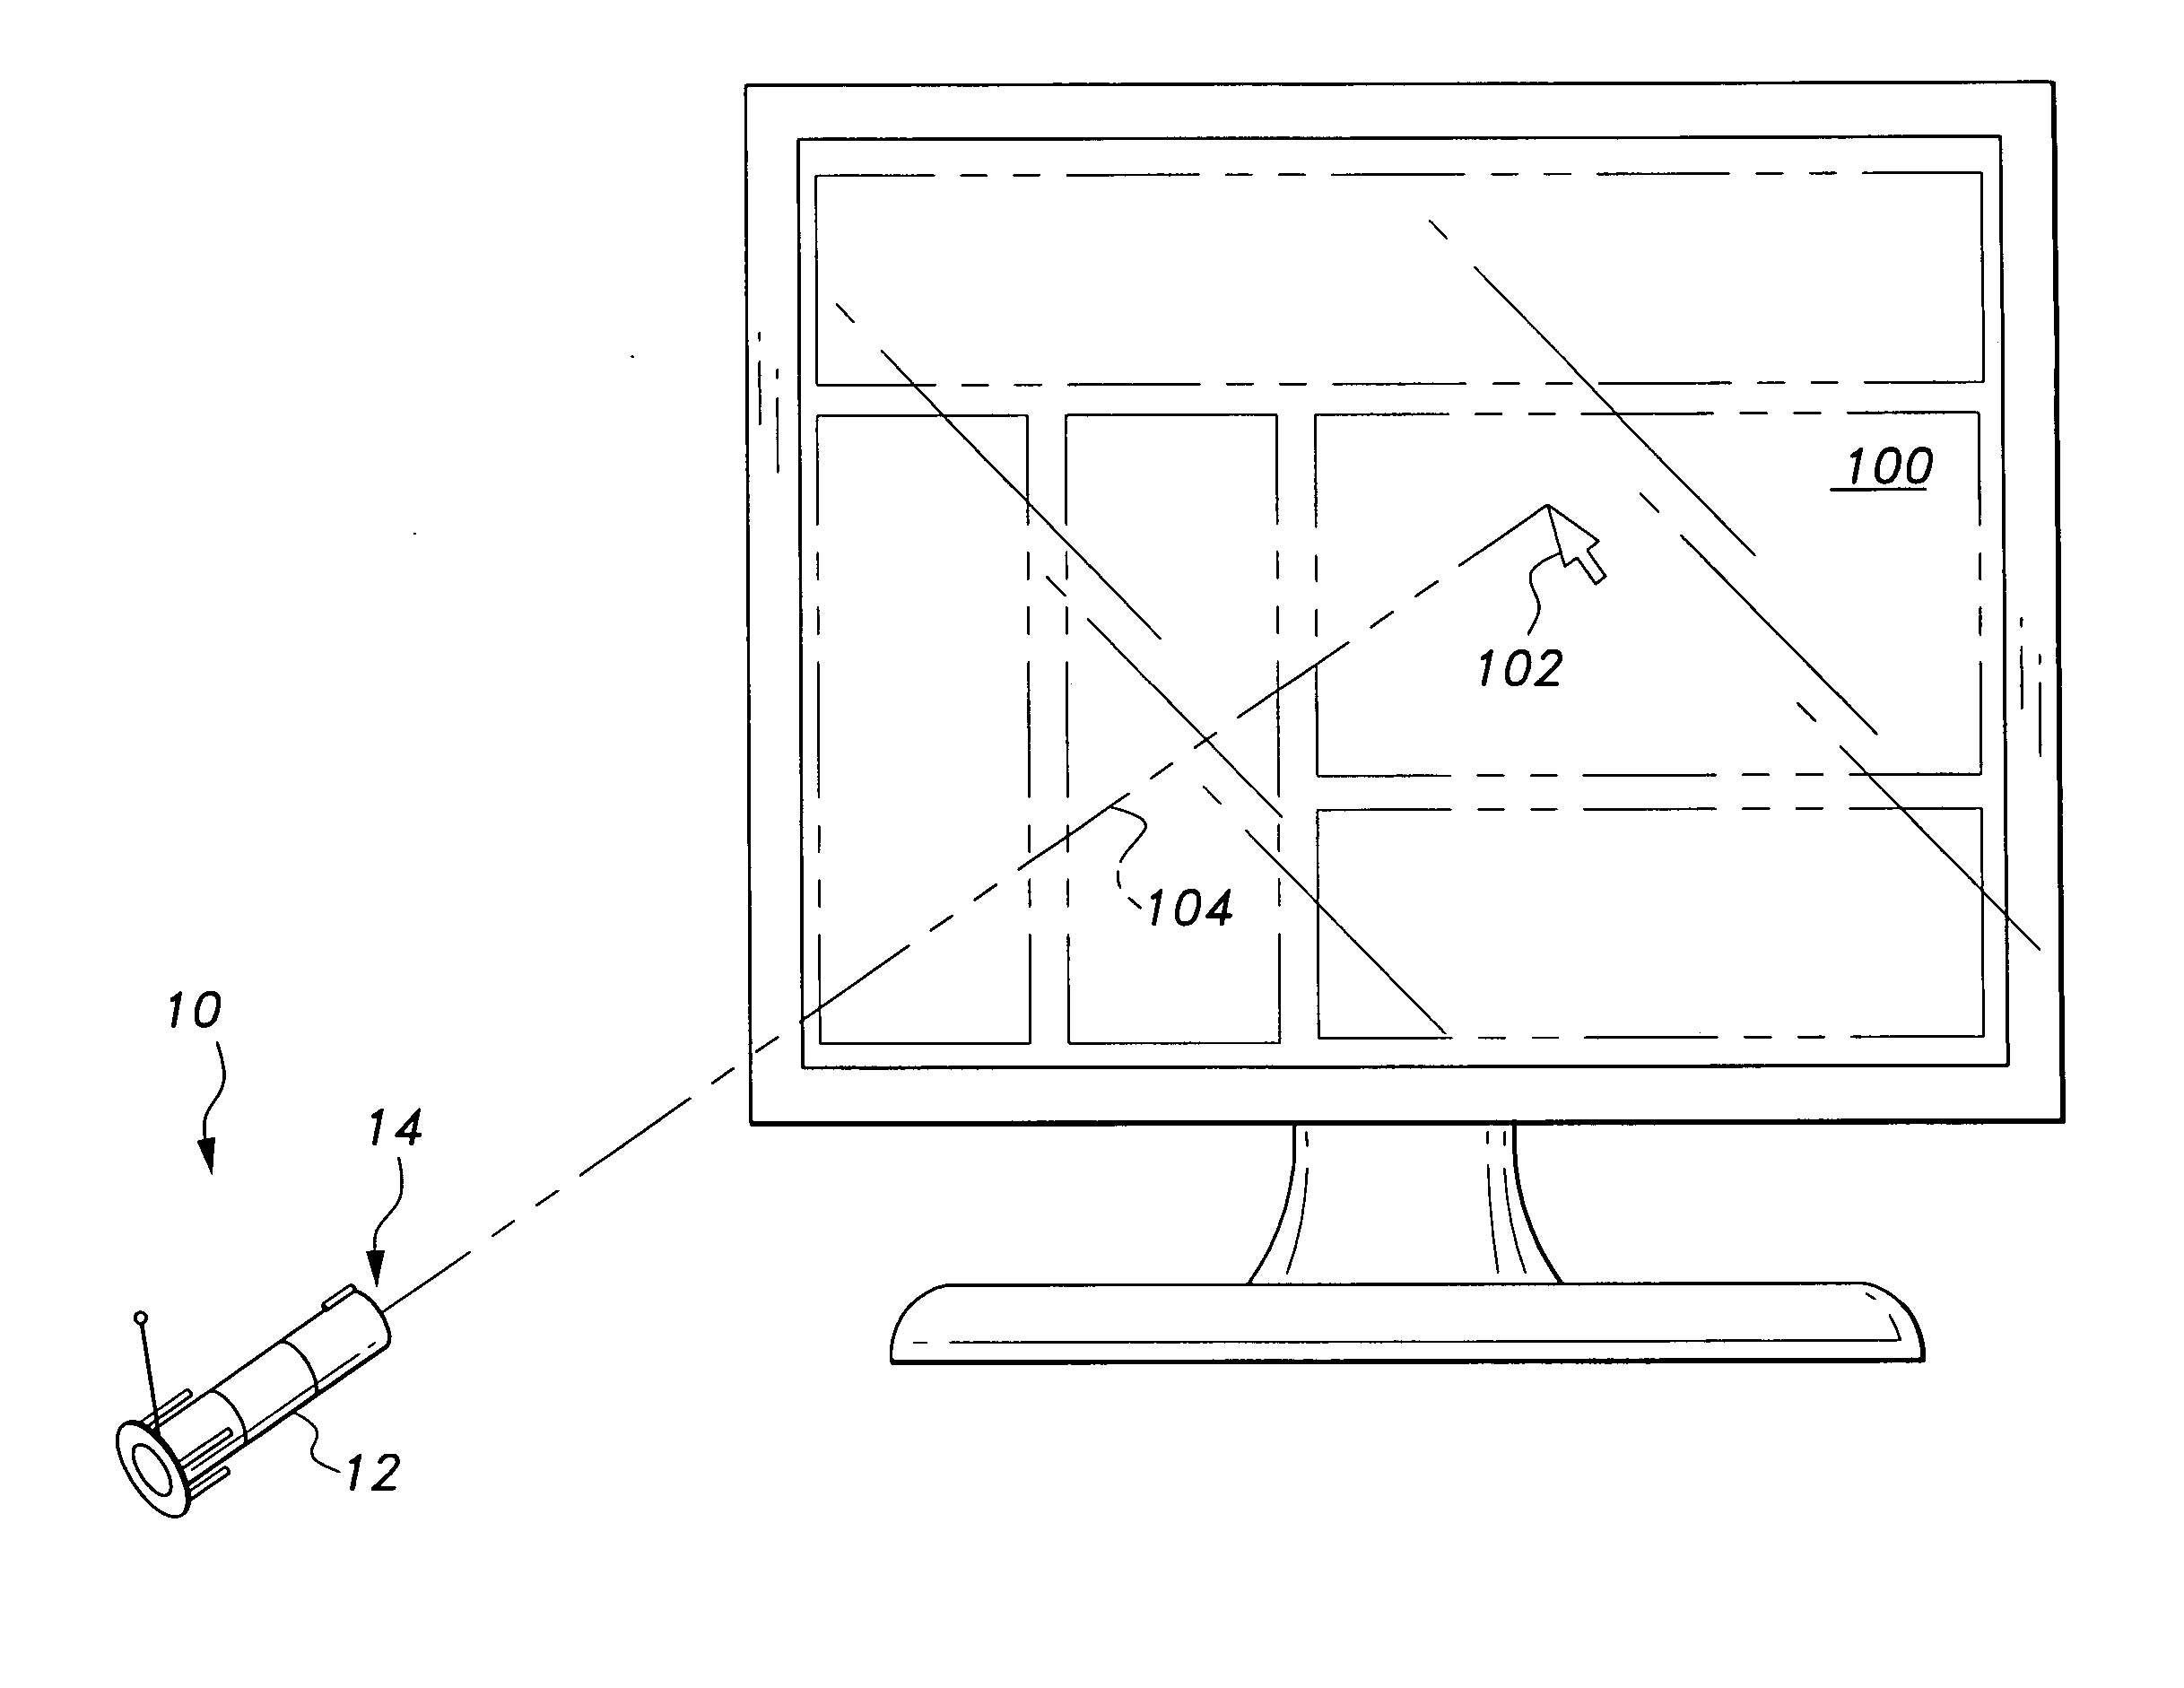 Computer pointing input device